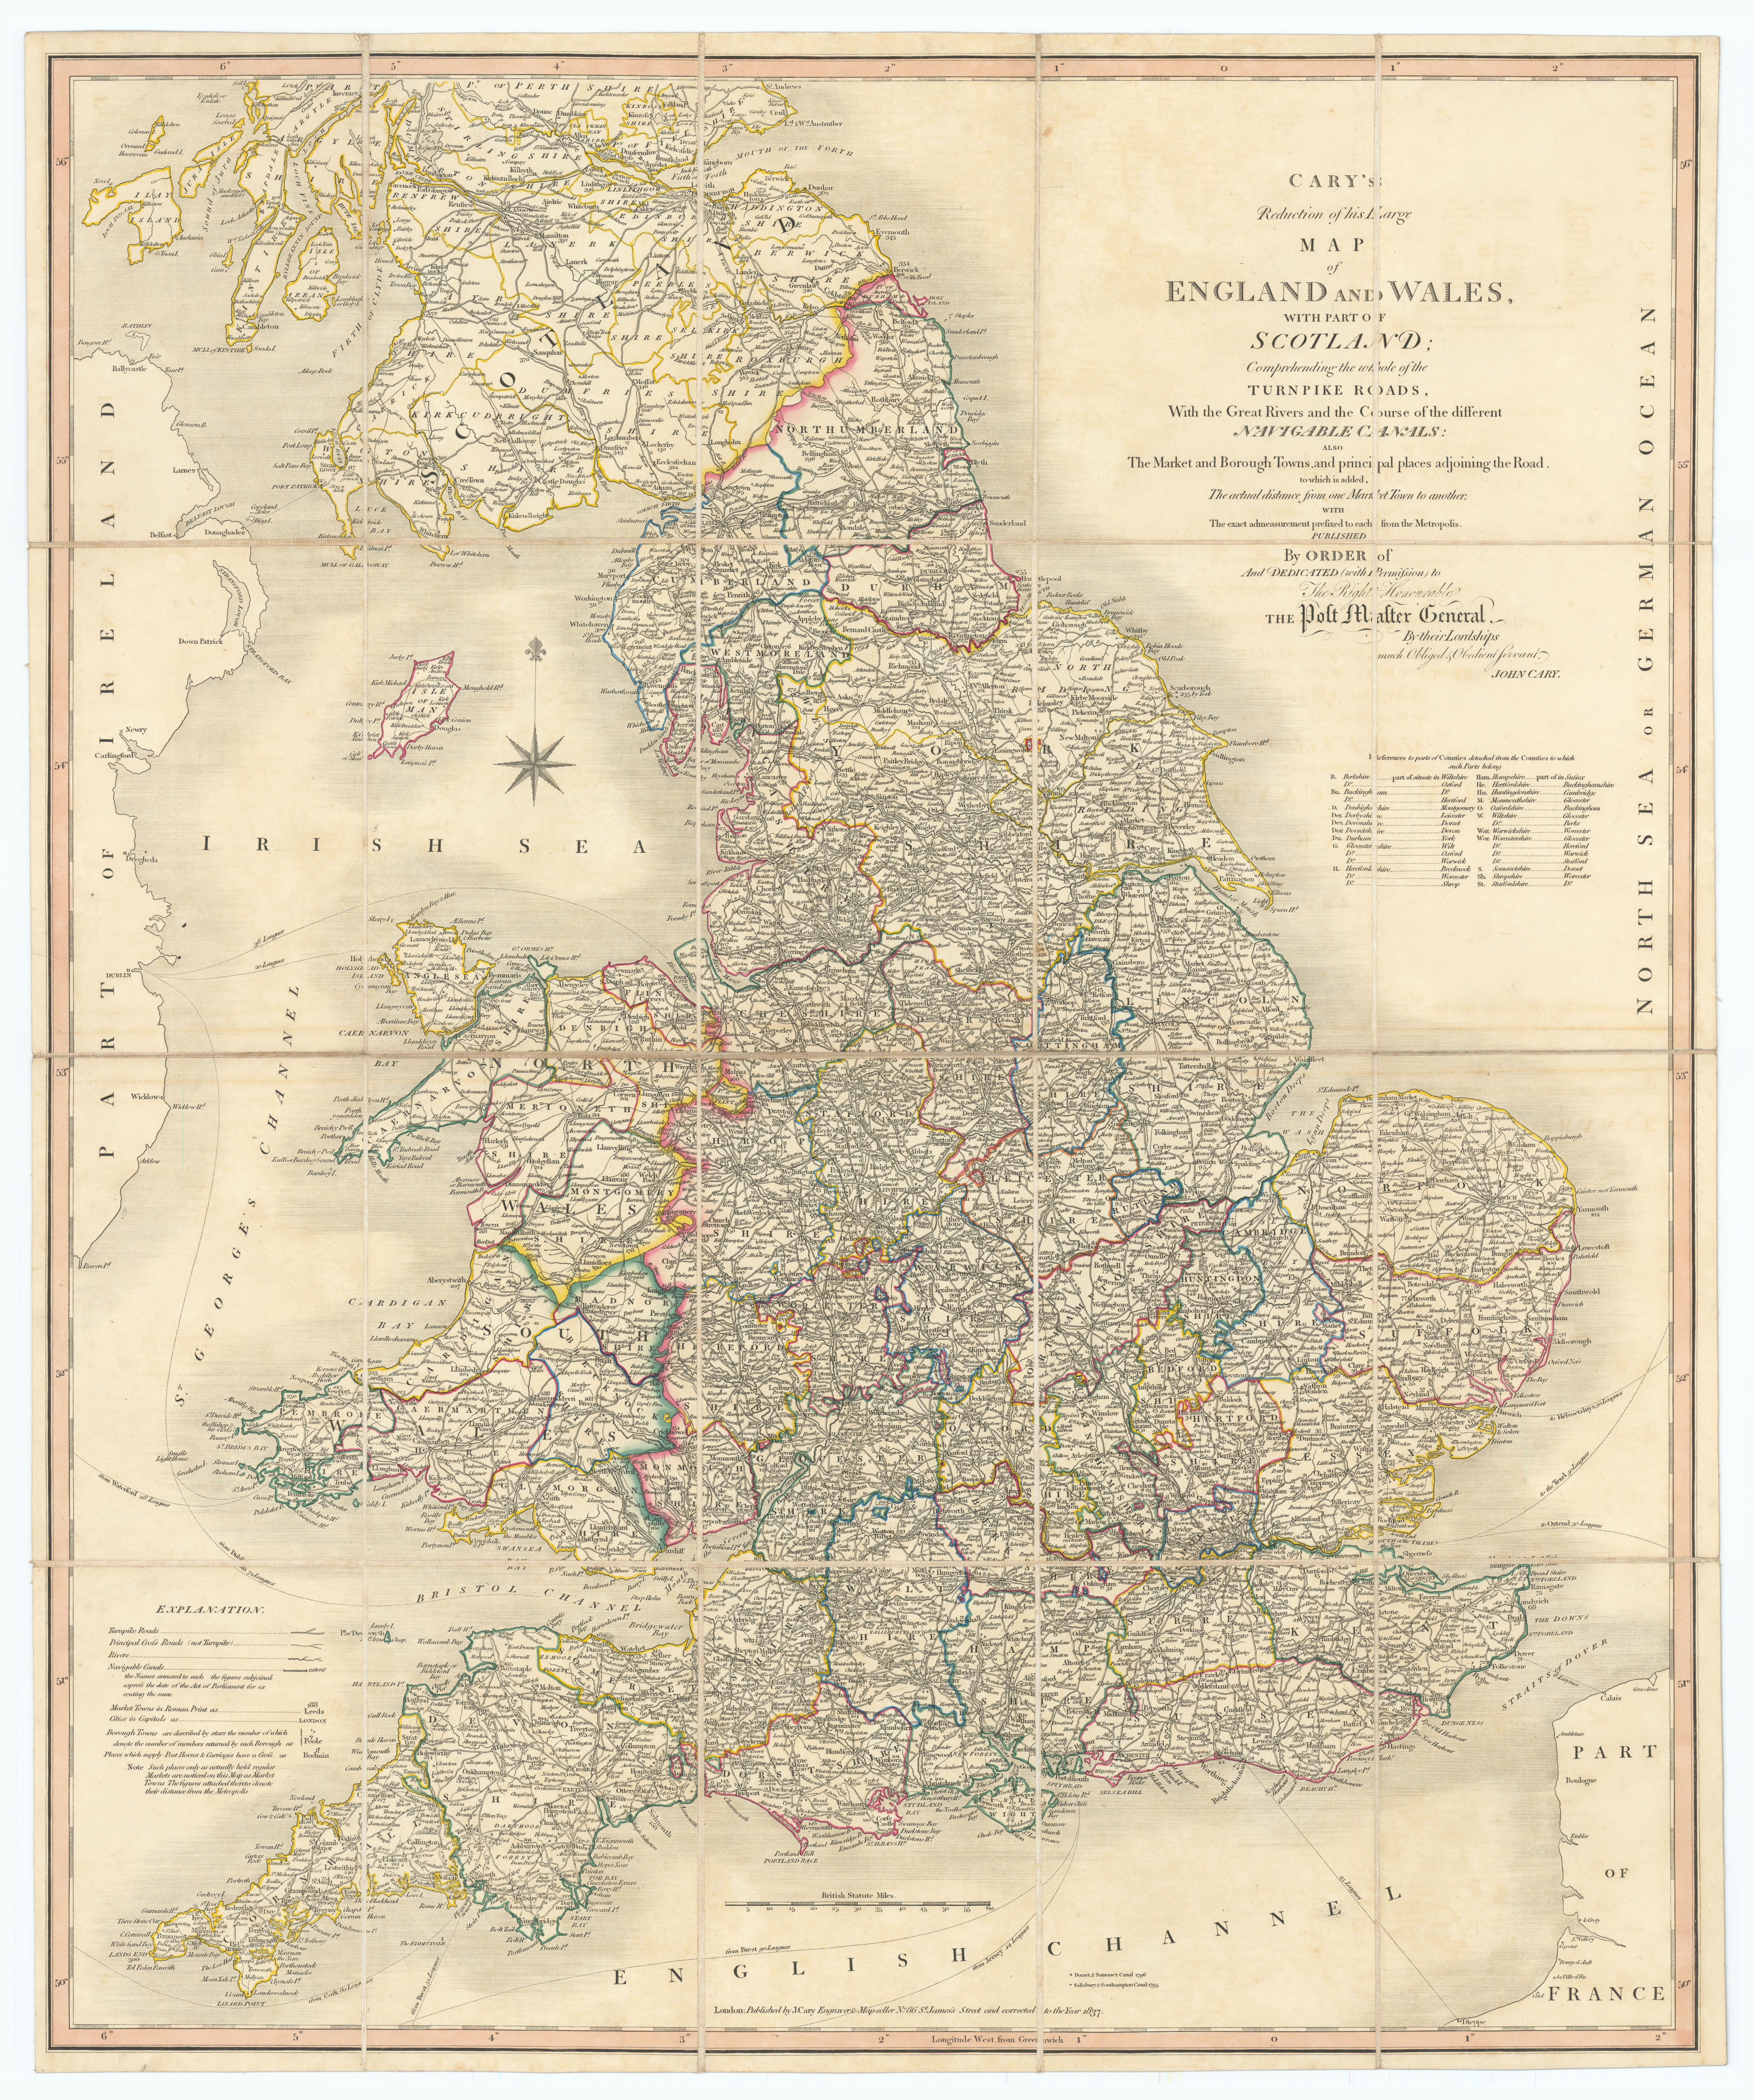 'Cary's reduction of his large map of England & Wales'. Turnpikes canals &c 1837